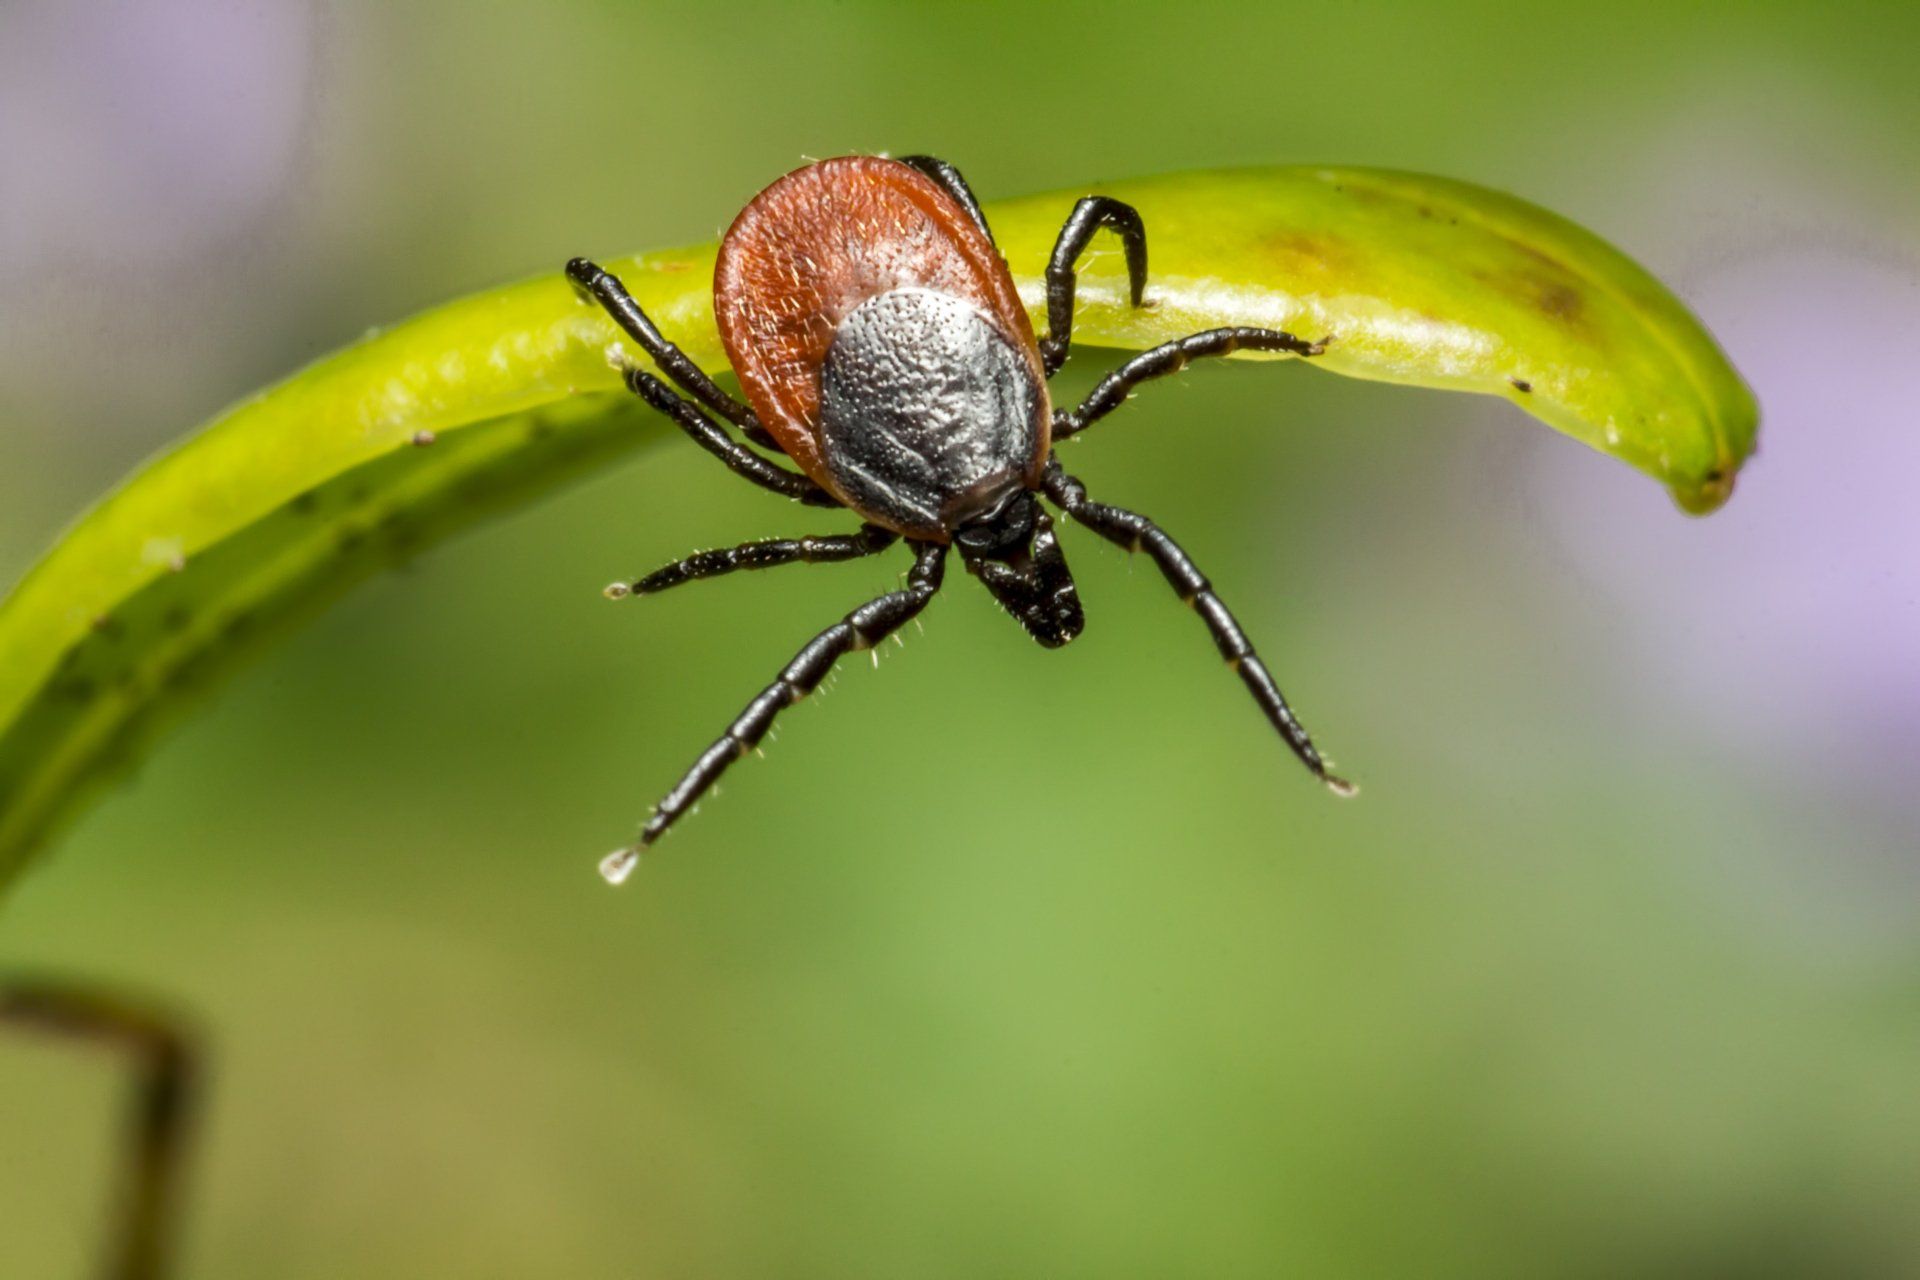 Lyme Disease effects on the eyes